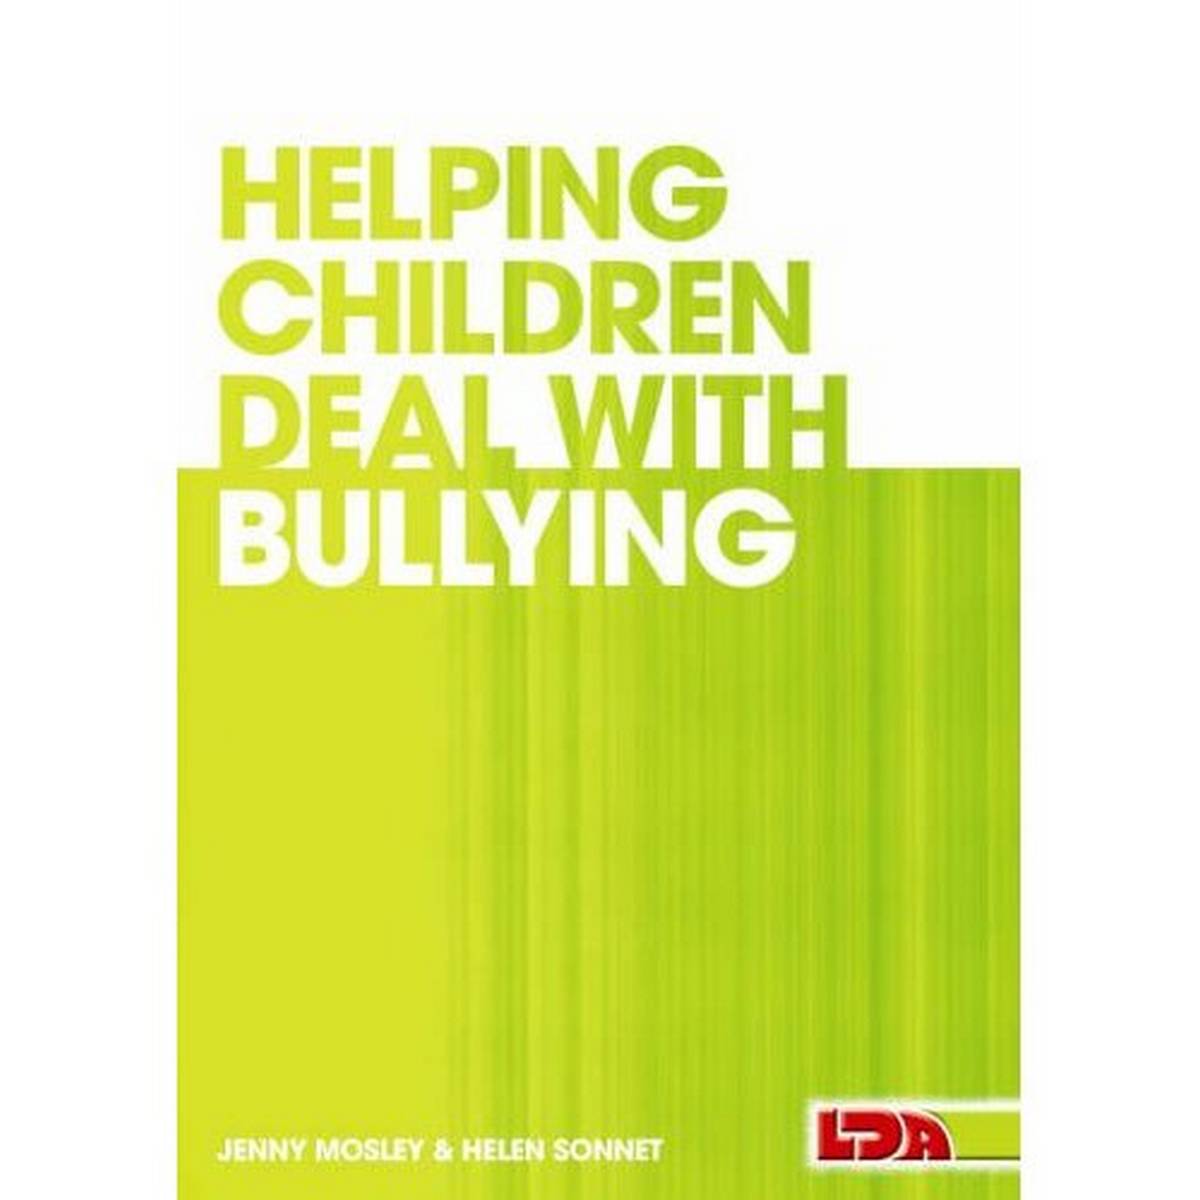 Helping Children Deal with Bullying